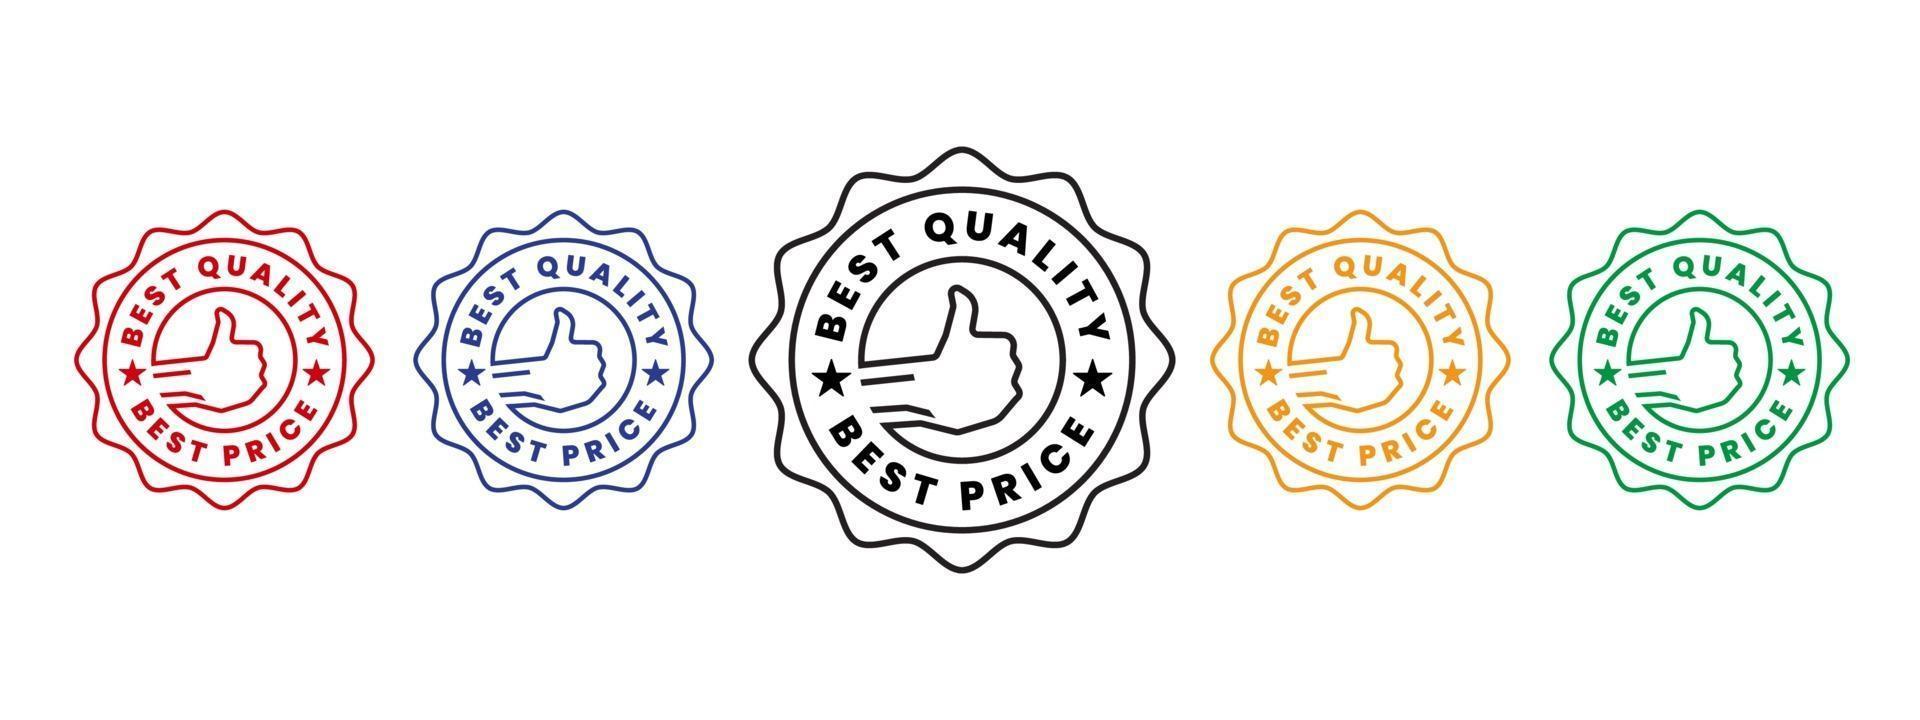 Best Seller and Best Price recommended logo badge or icon vector